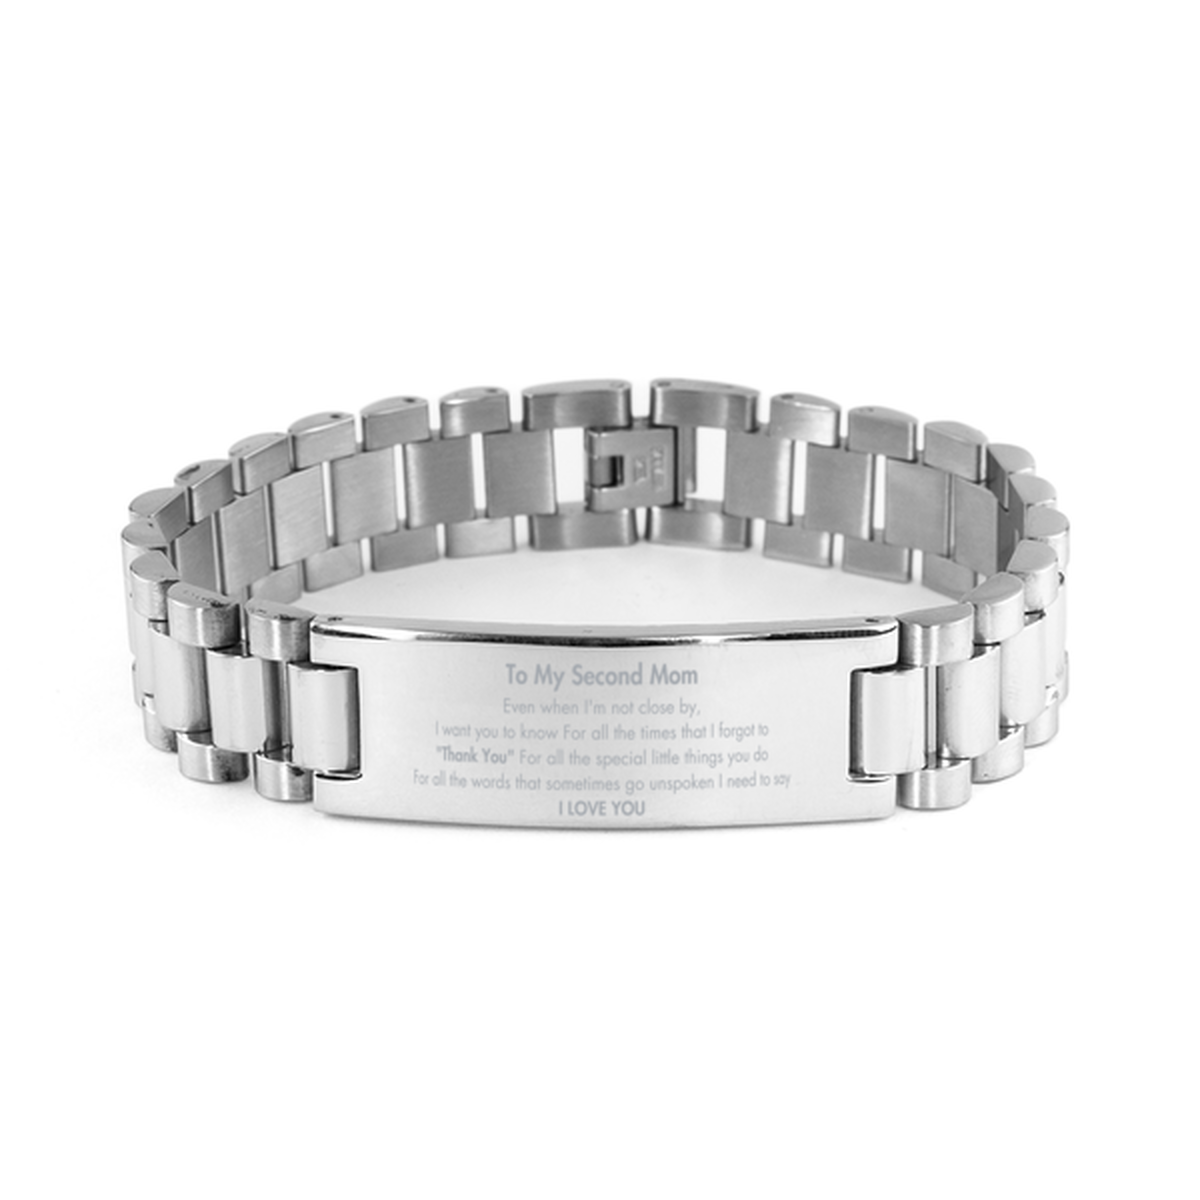 Thank You Gifts for Second Mom, Keepsake Ladder Stainless Steel Bracelet Gifts for Second Mom Birthday Mother's day Father's Day Second Mom For all the words That sometimes go unspoken I need to say I LOVE YOU